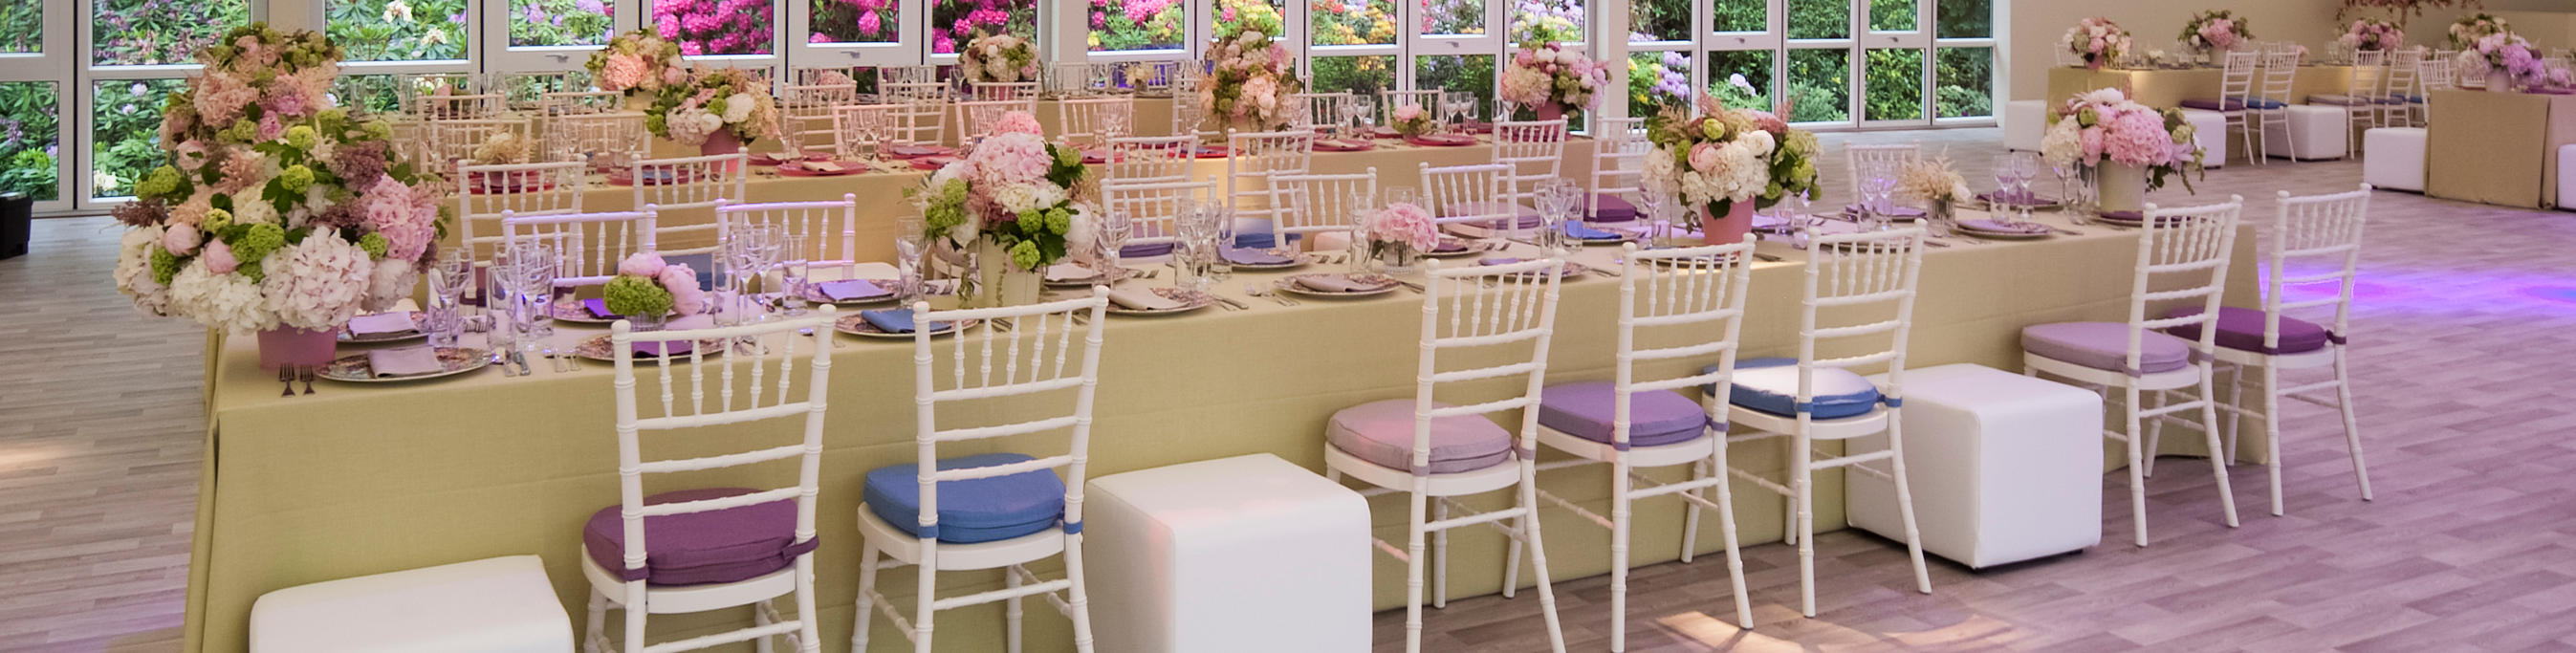 Hire everything you need to create stunning looking tables at your event